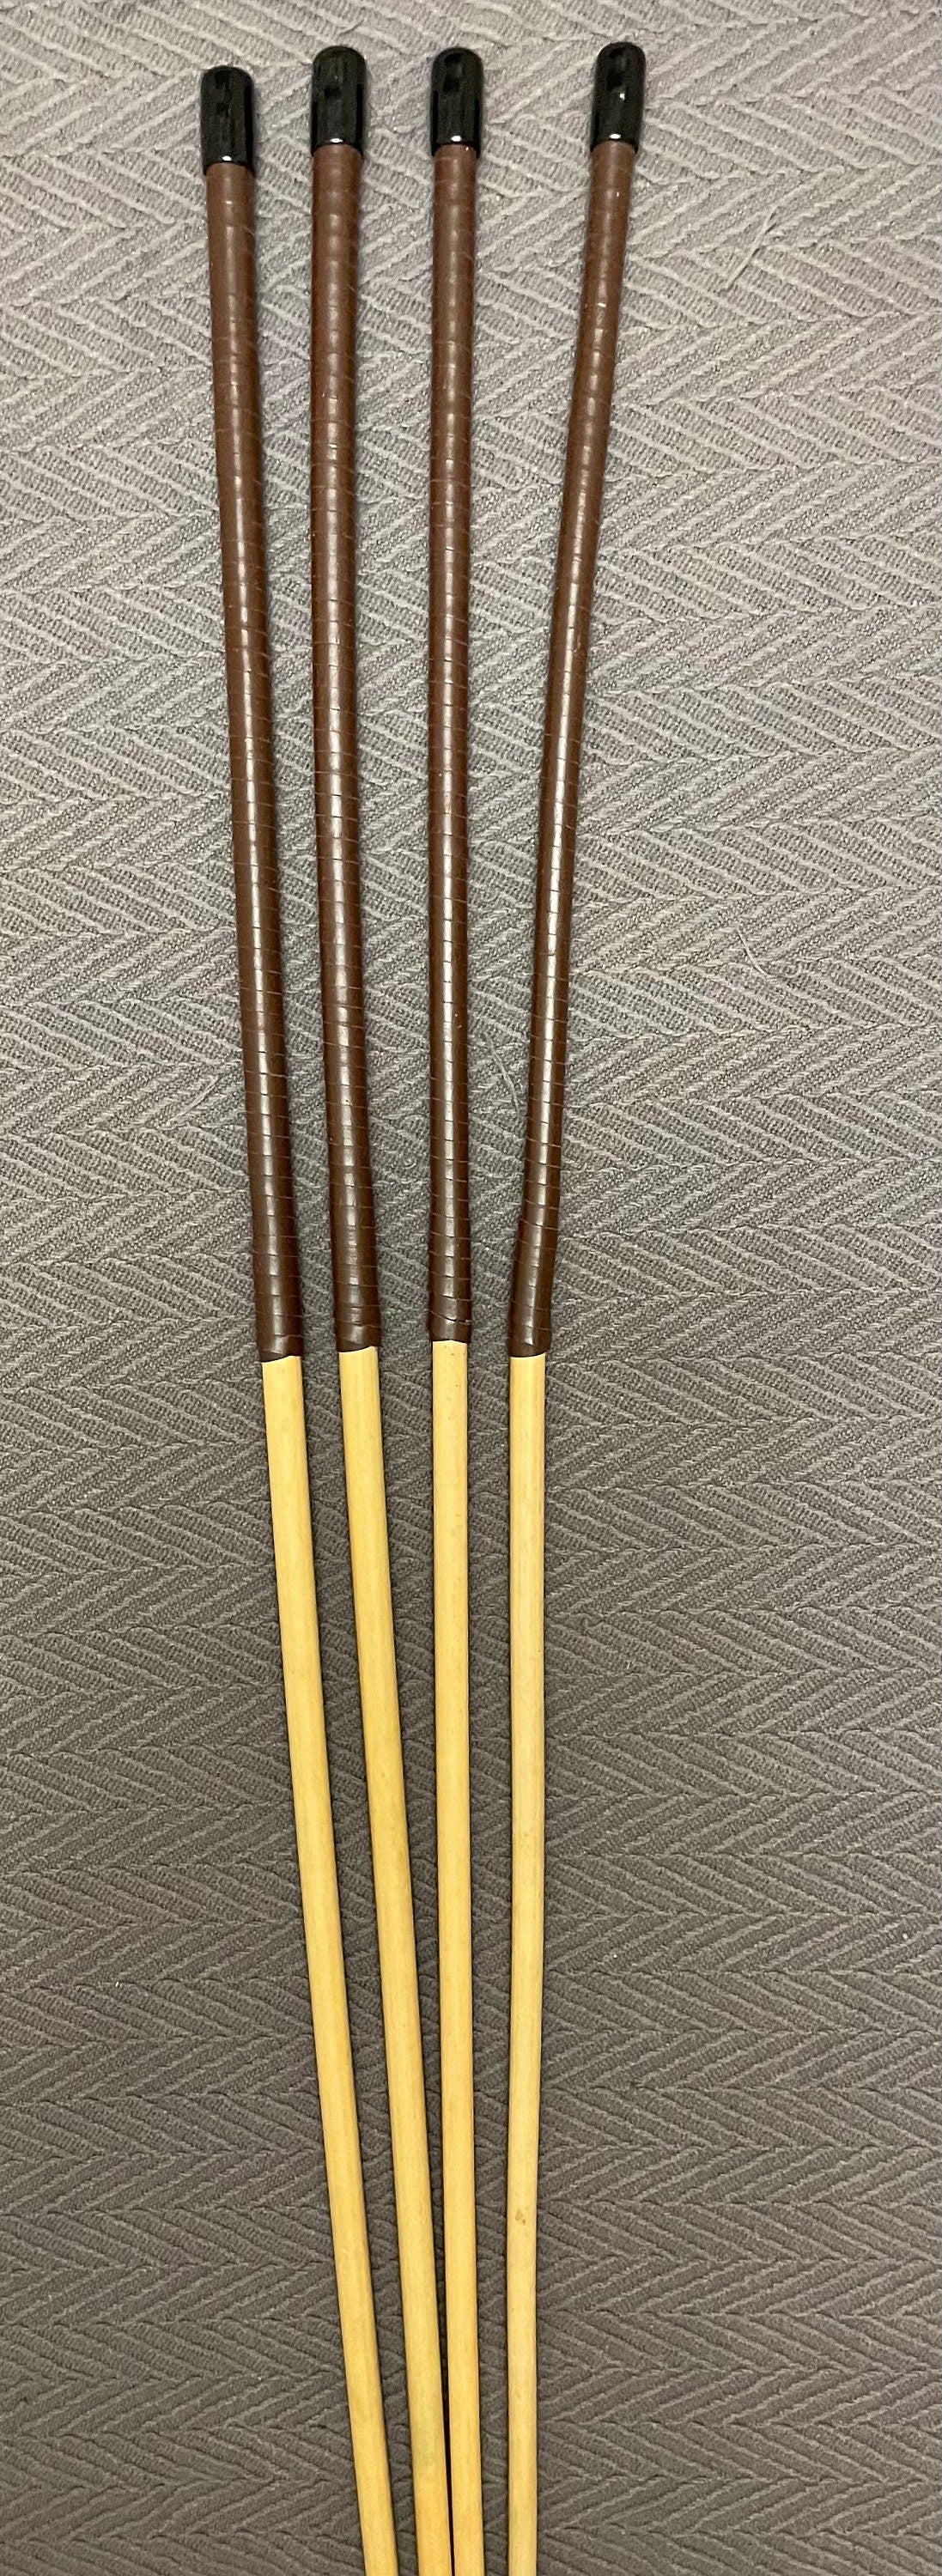 Knotless Dragon Canes / Ultimate Rattan Canes Set of 4 with Brandy Kangaroo Leather Handles 92 cms Length - Englishvice Canes